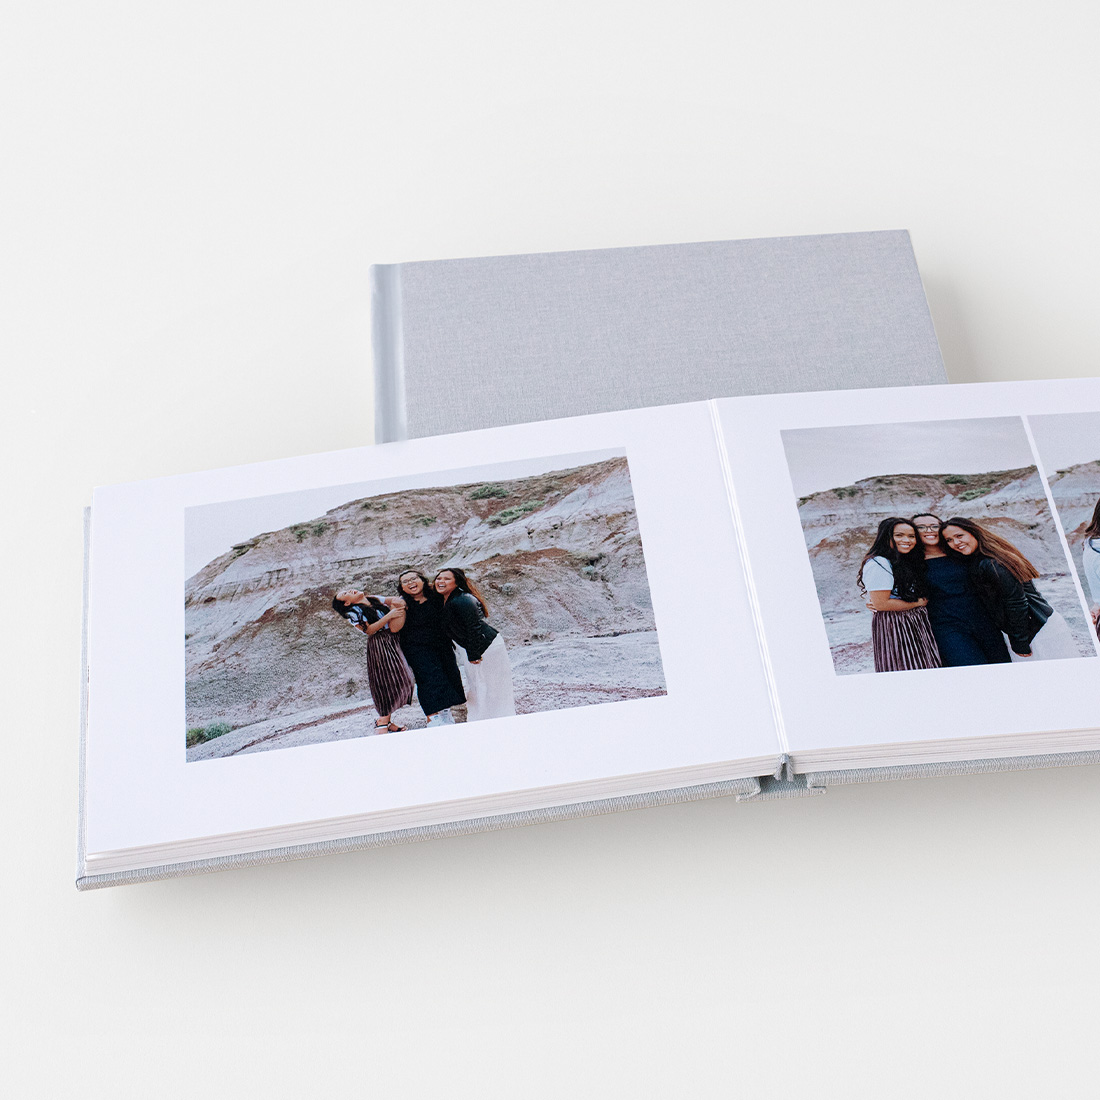 Buy La Lente Premium Photo Album, Large Customizable, 50 pages/100 Sheets,  4x6, 5x7, 8x10, Gold Stamped, Dry-Mount, Picture Scrapbook, Wedding,  Vacation, Anniversary, Baby Shower, Graduation or Travel Online at Low  Prices in